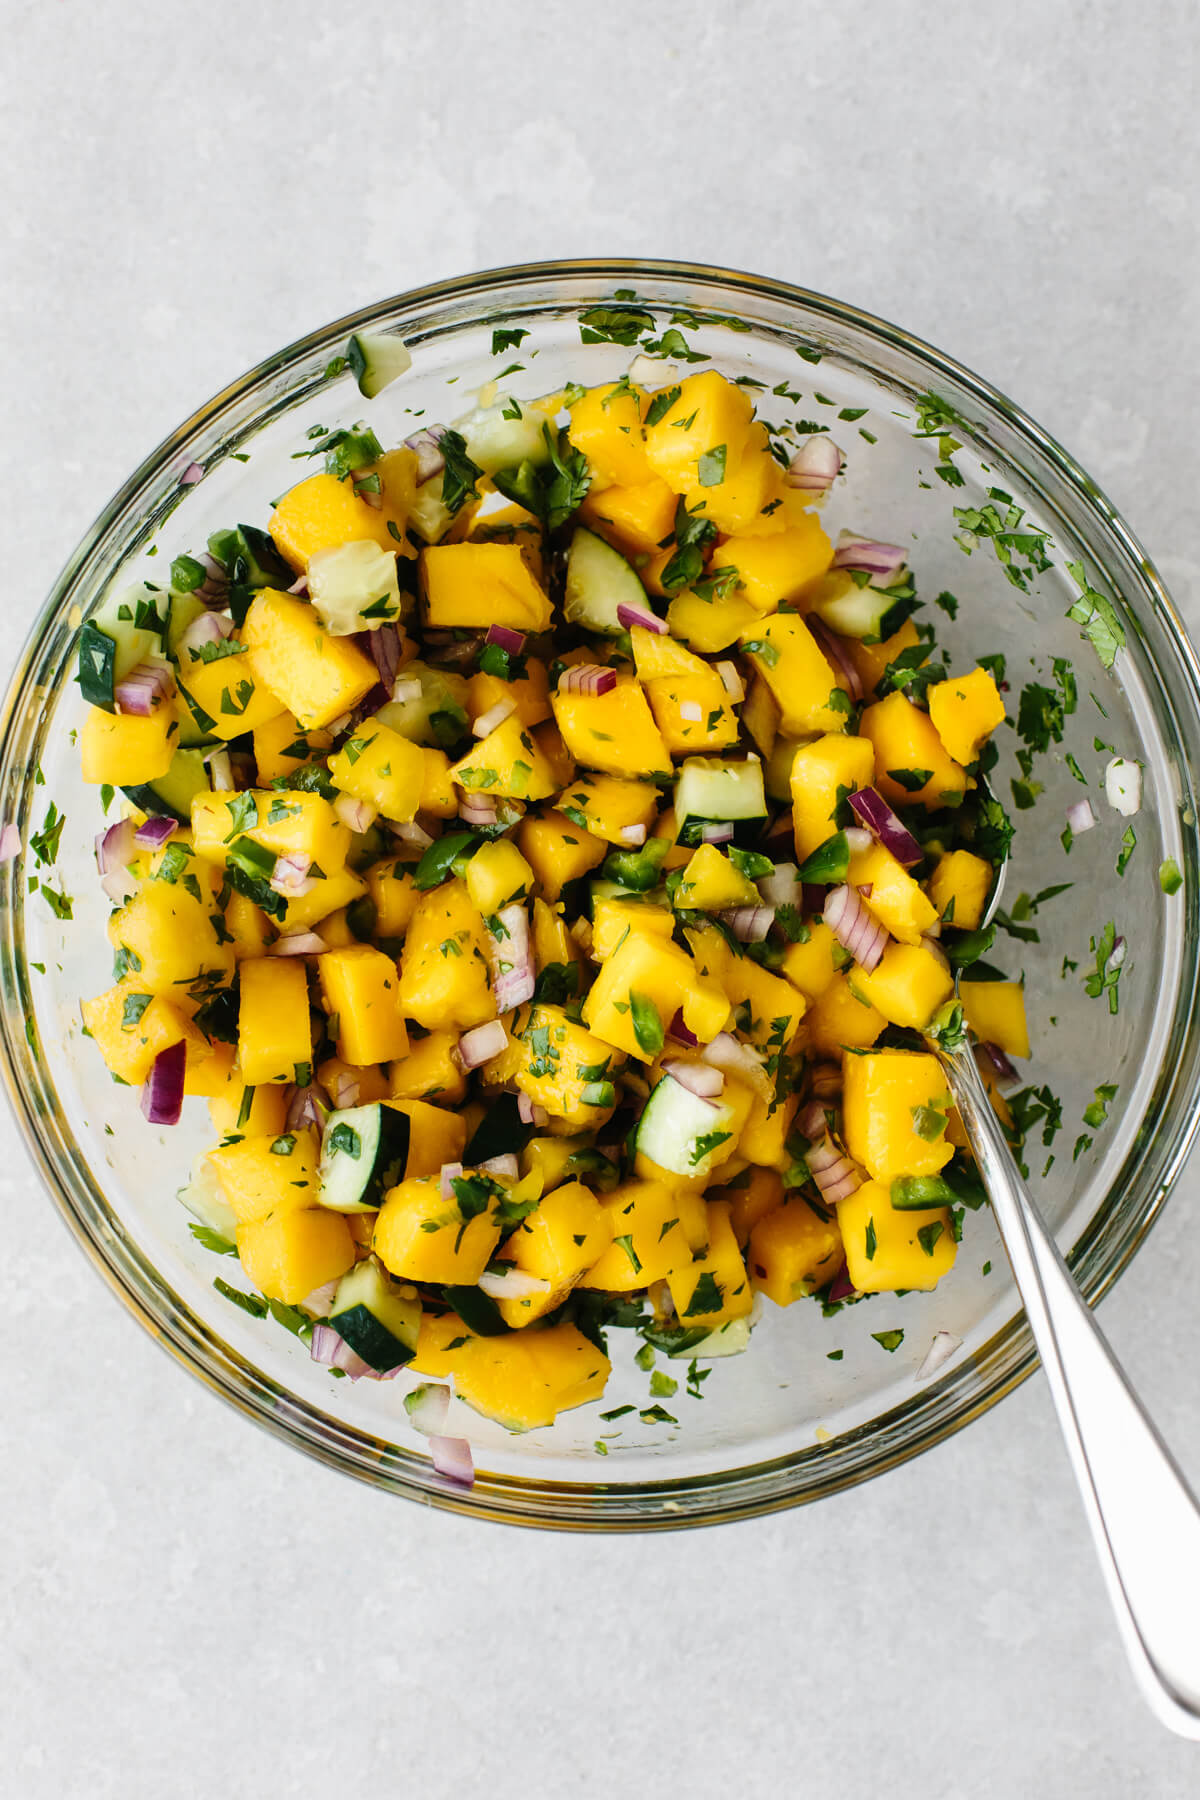 Mixing mango salsa in a bowl.